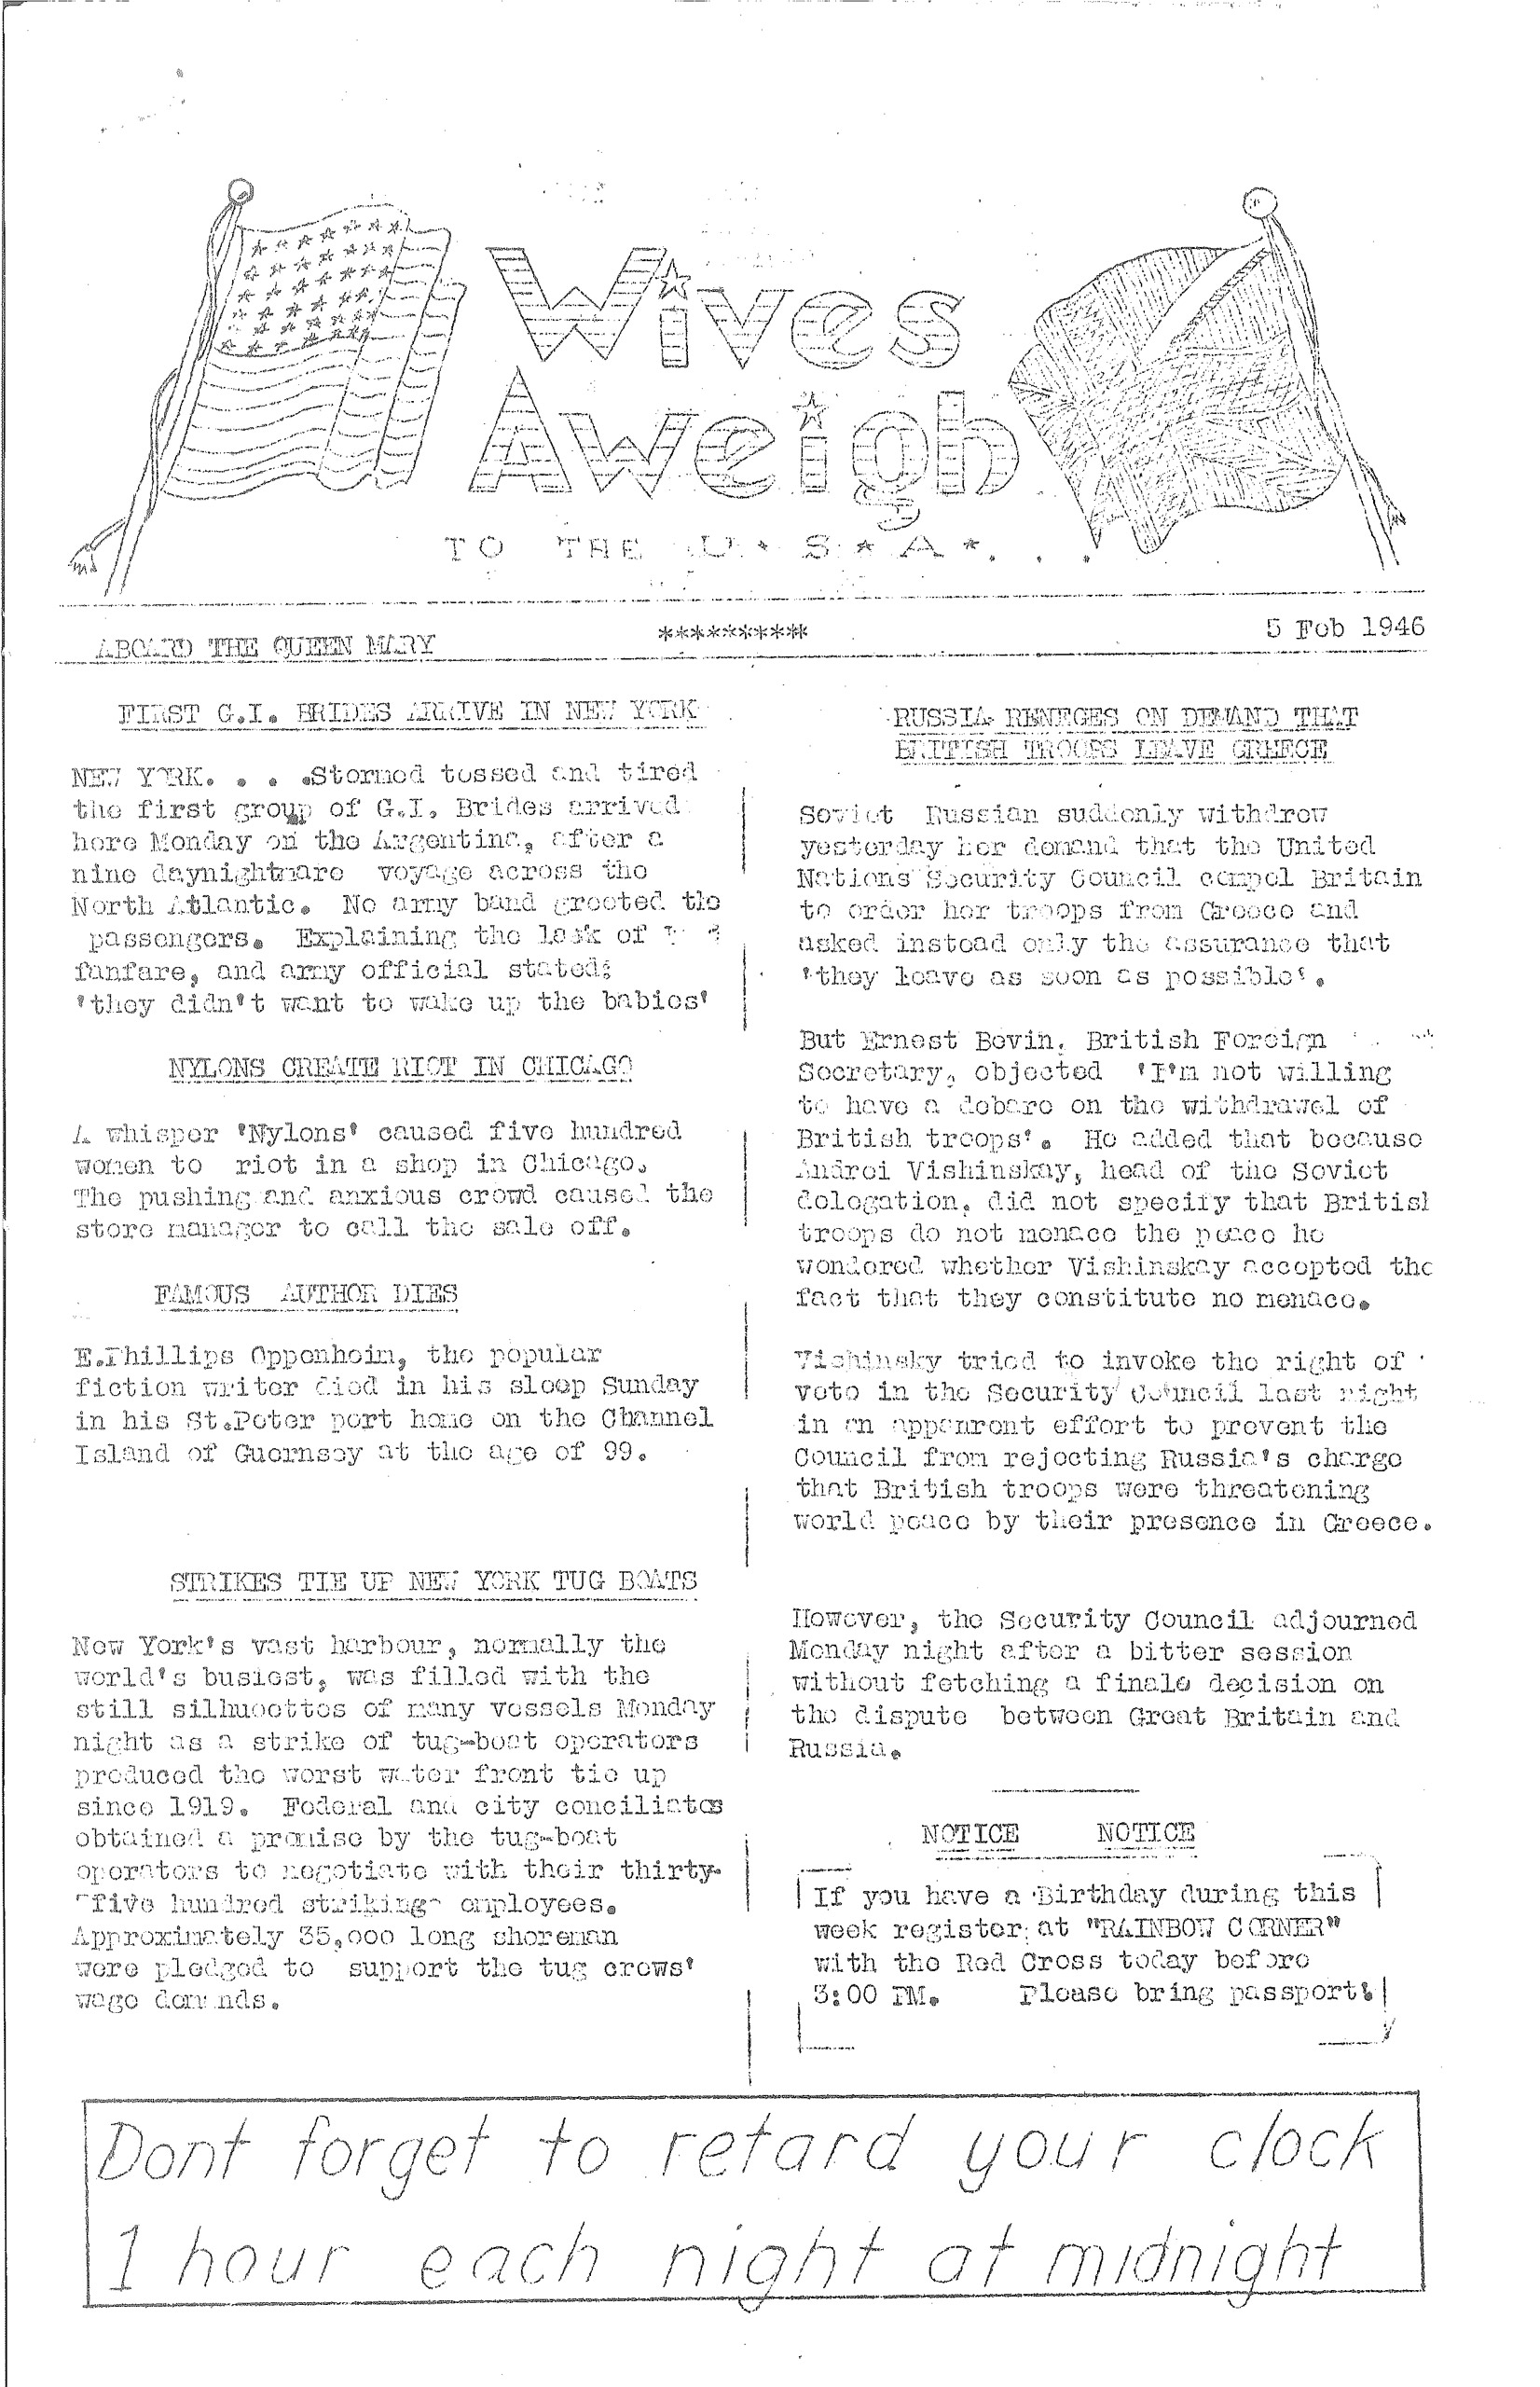 Wives Aweigh Newsletter, February 5, 1946.